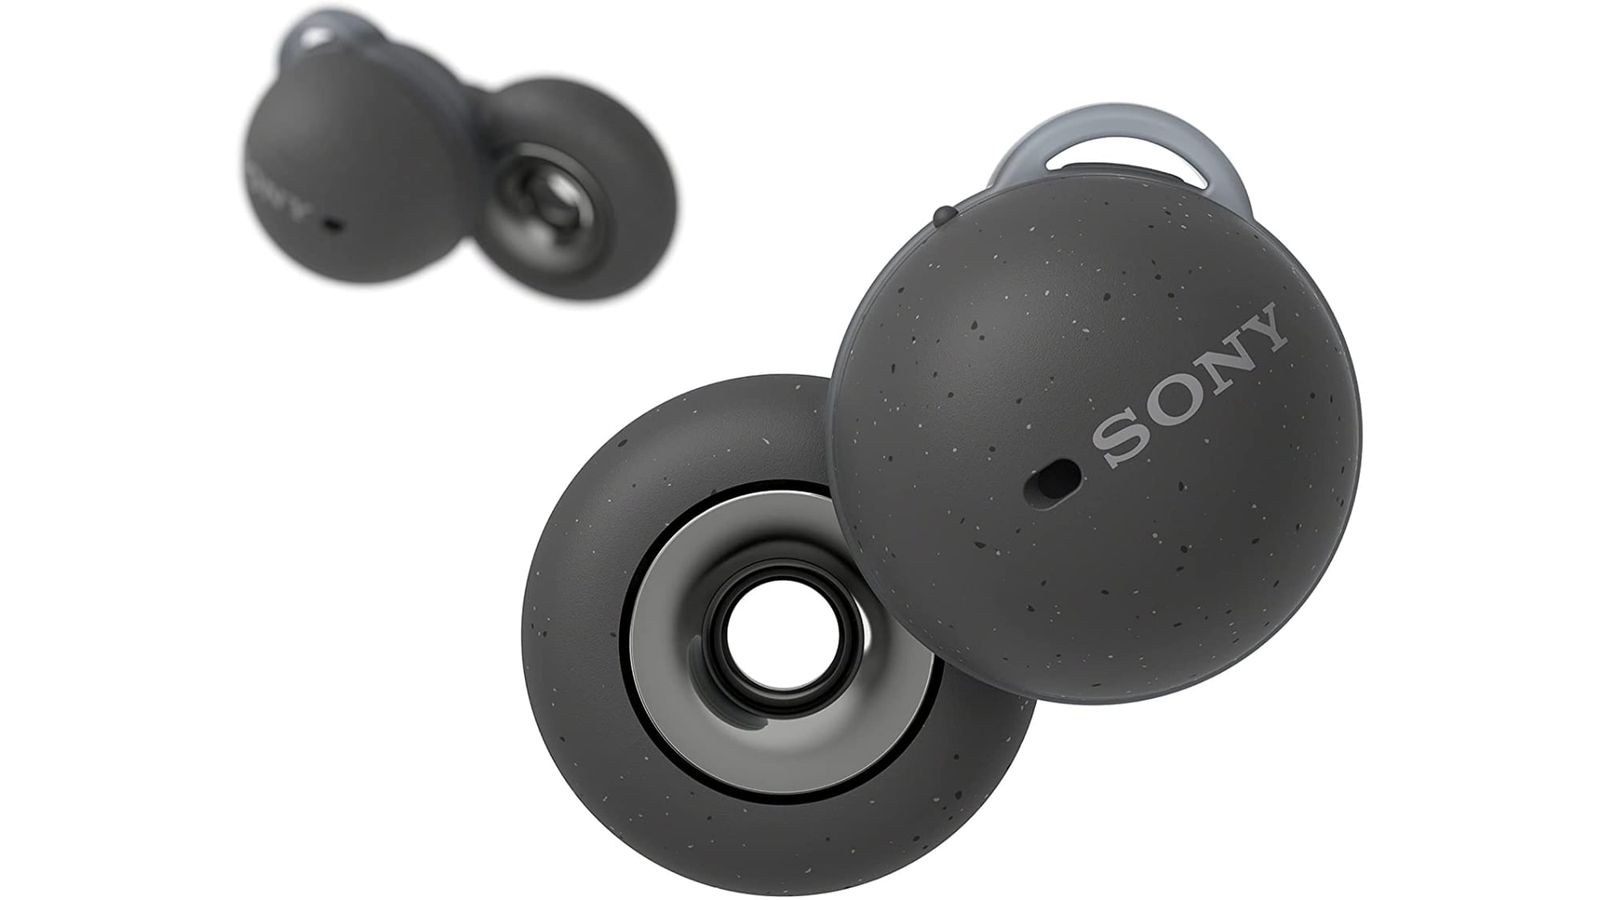 Sony LinkBuds TWS earbuds with unique open ring design launched for $178 -  Gizmochina